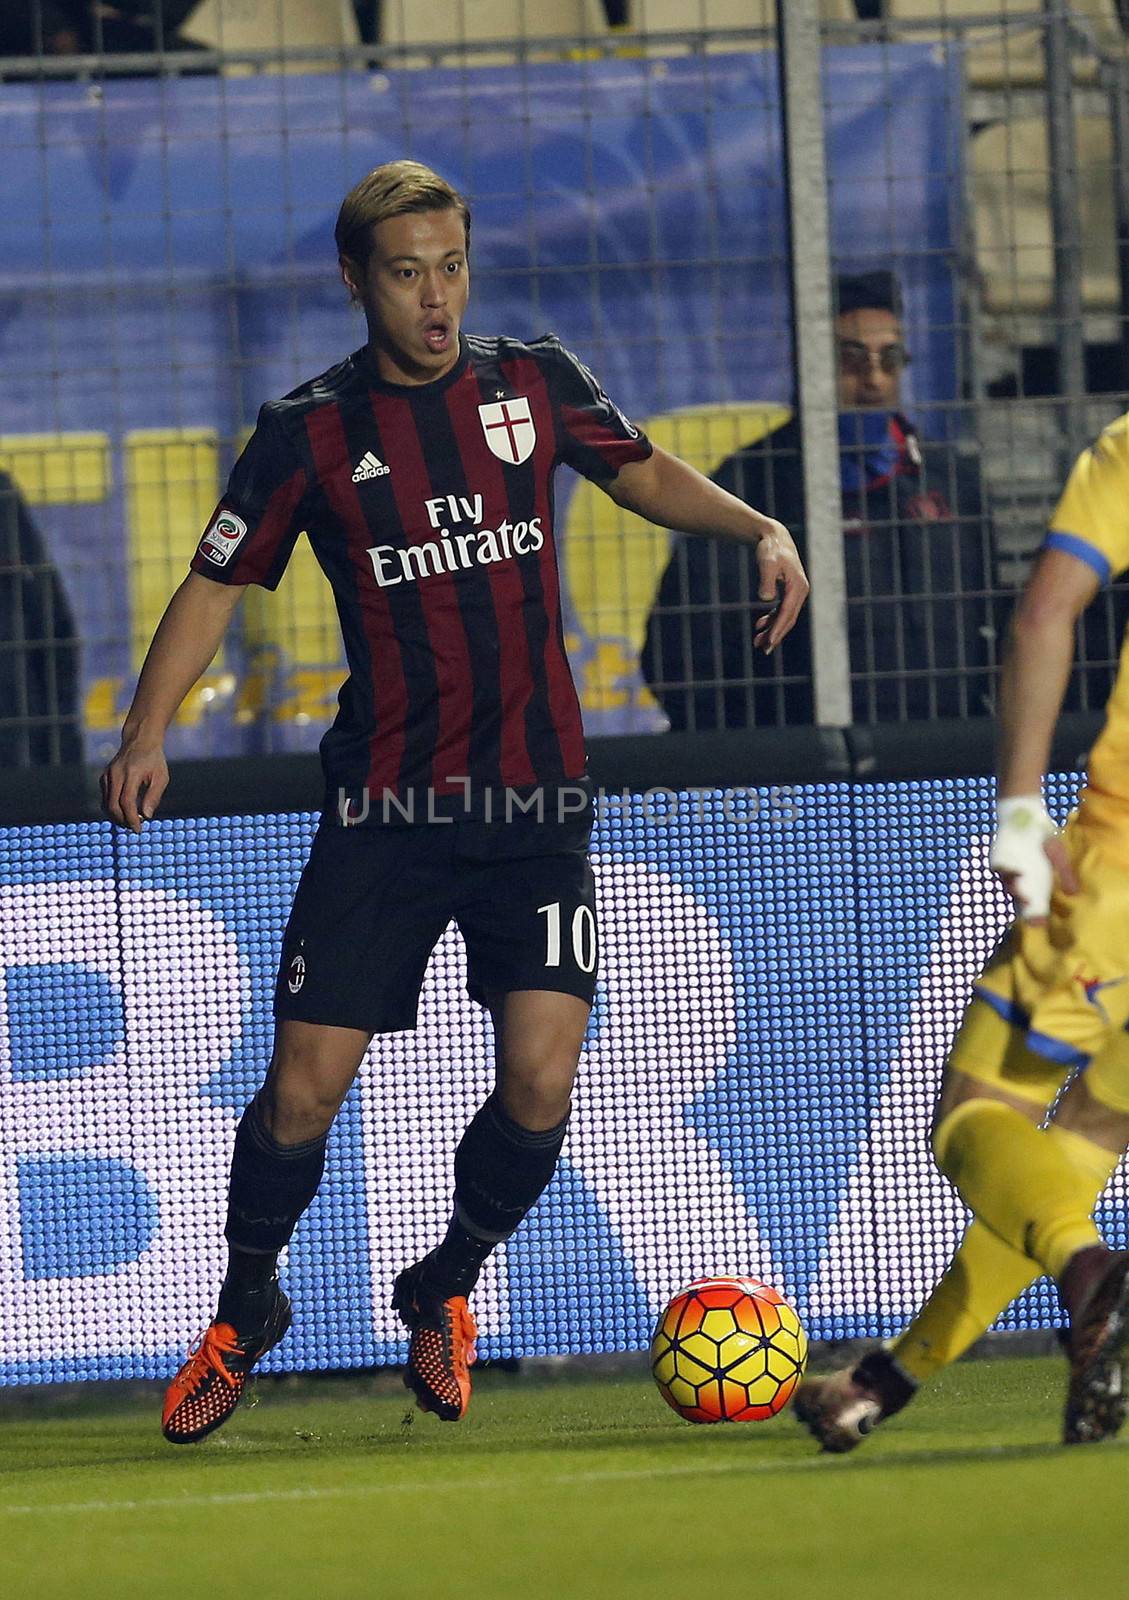 ITALY, Frosinone: Milan's Keisuke Honda controls the ball during the Italian Serie A match in which AC Milan would defeat Frosinone by a score of 4-2 at Matusa Stadium in Frosinone, Italy on December 20, 2015.